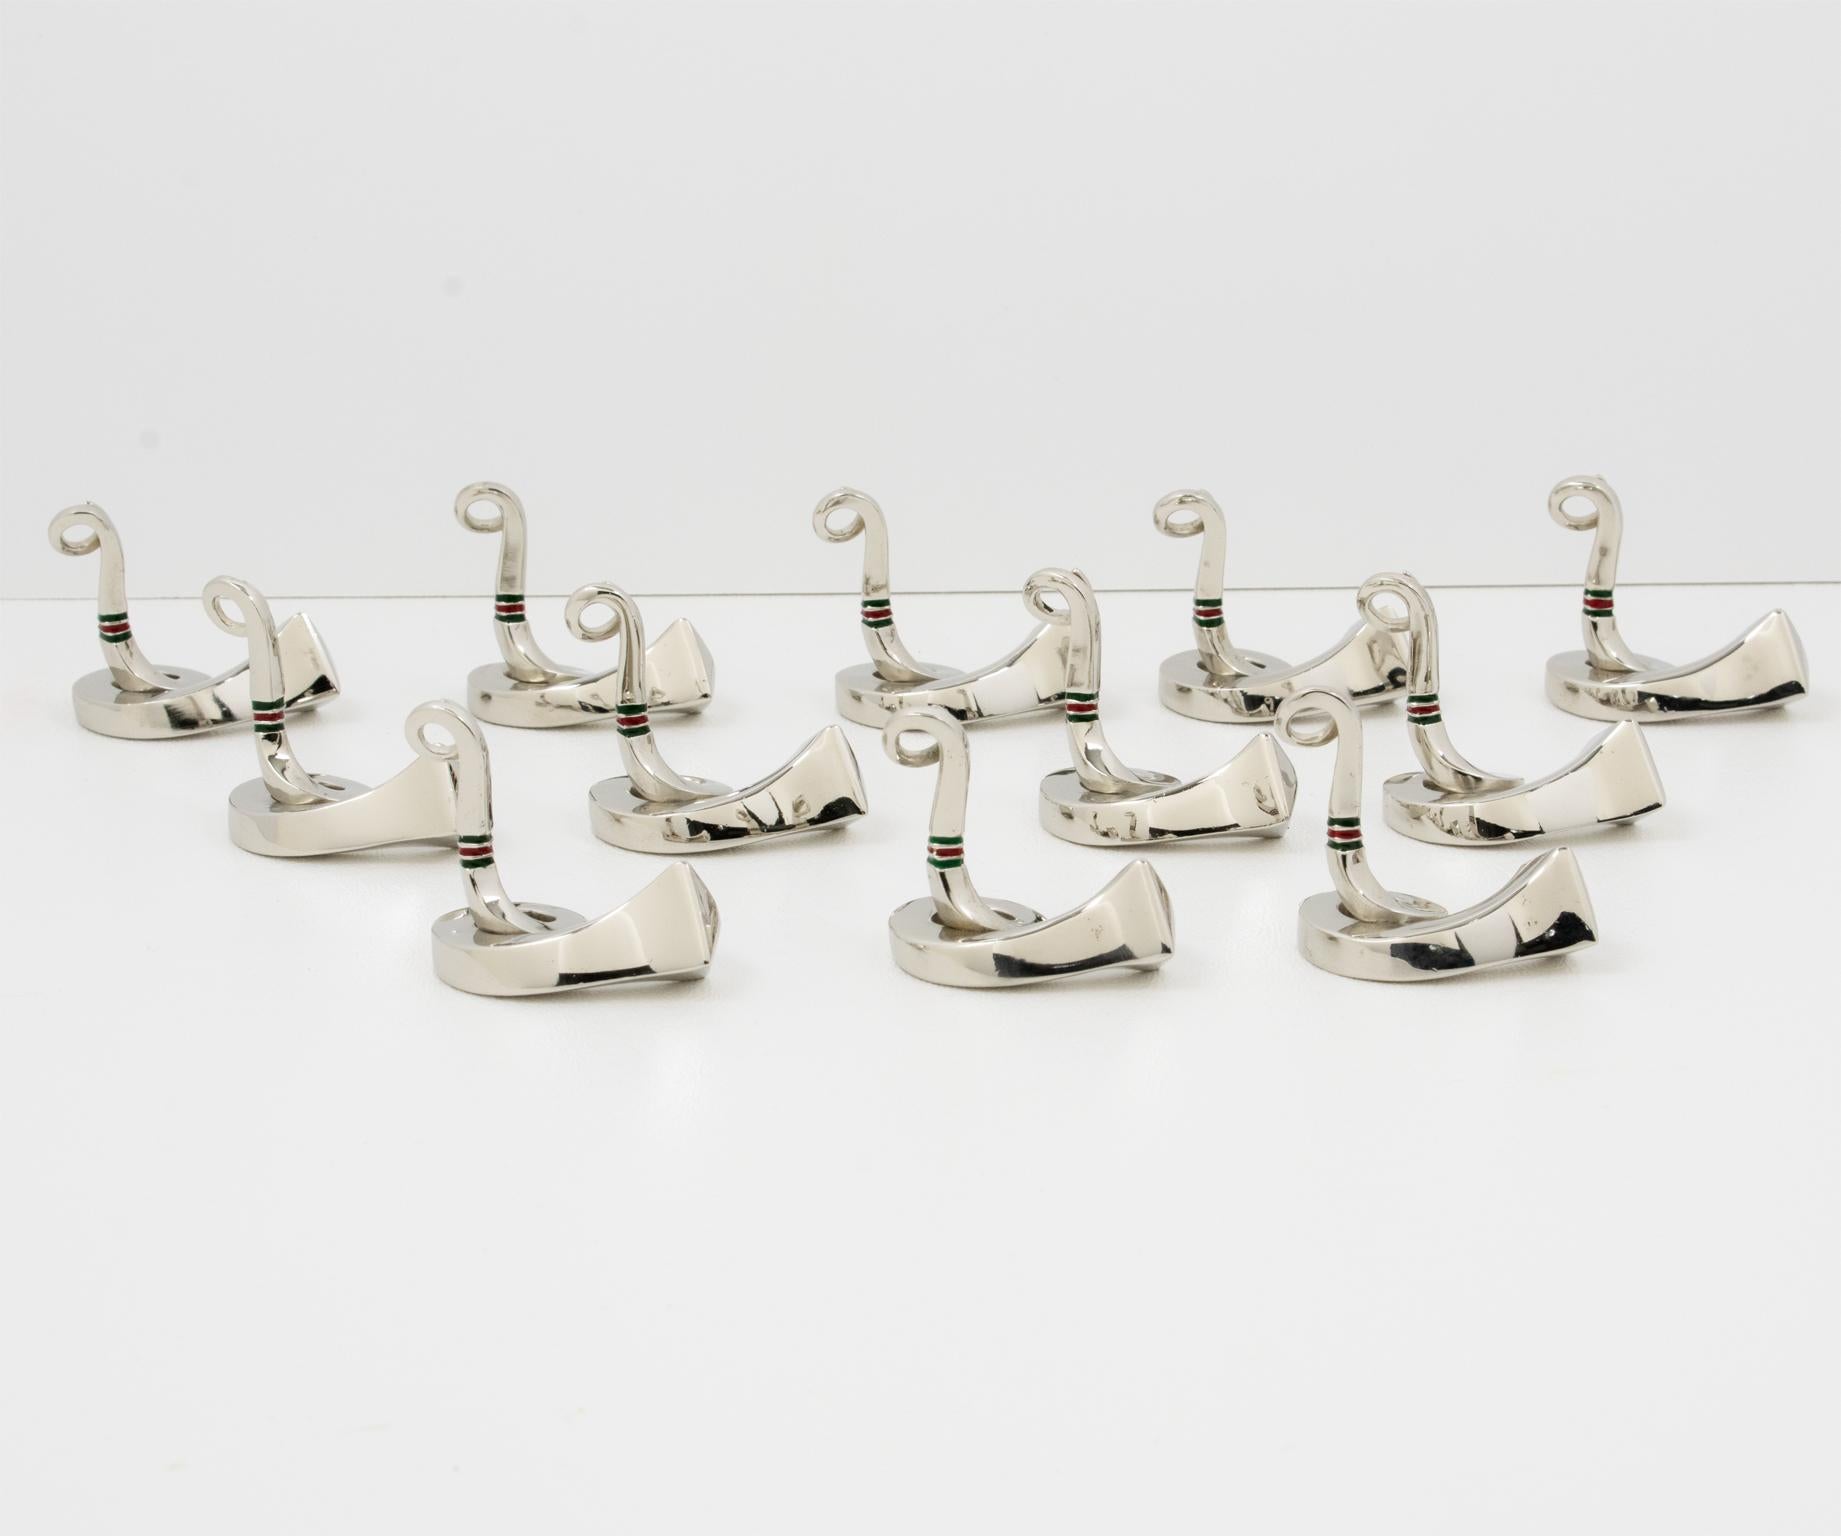 Dine in style with these whimsical chromed metal and enamel luxury place card holders designed by Gucci, Italy. The set of twelve pieces features an equestrian design motif with a high-polished chrome-plated brass horseshoe nail or hoof nail design